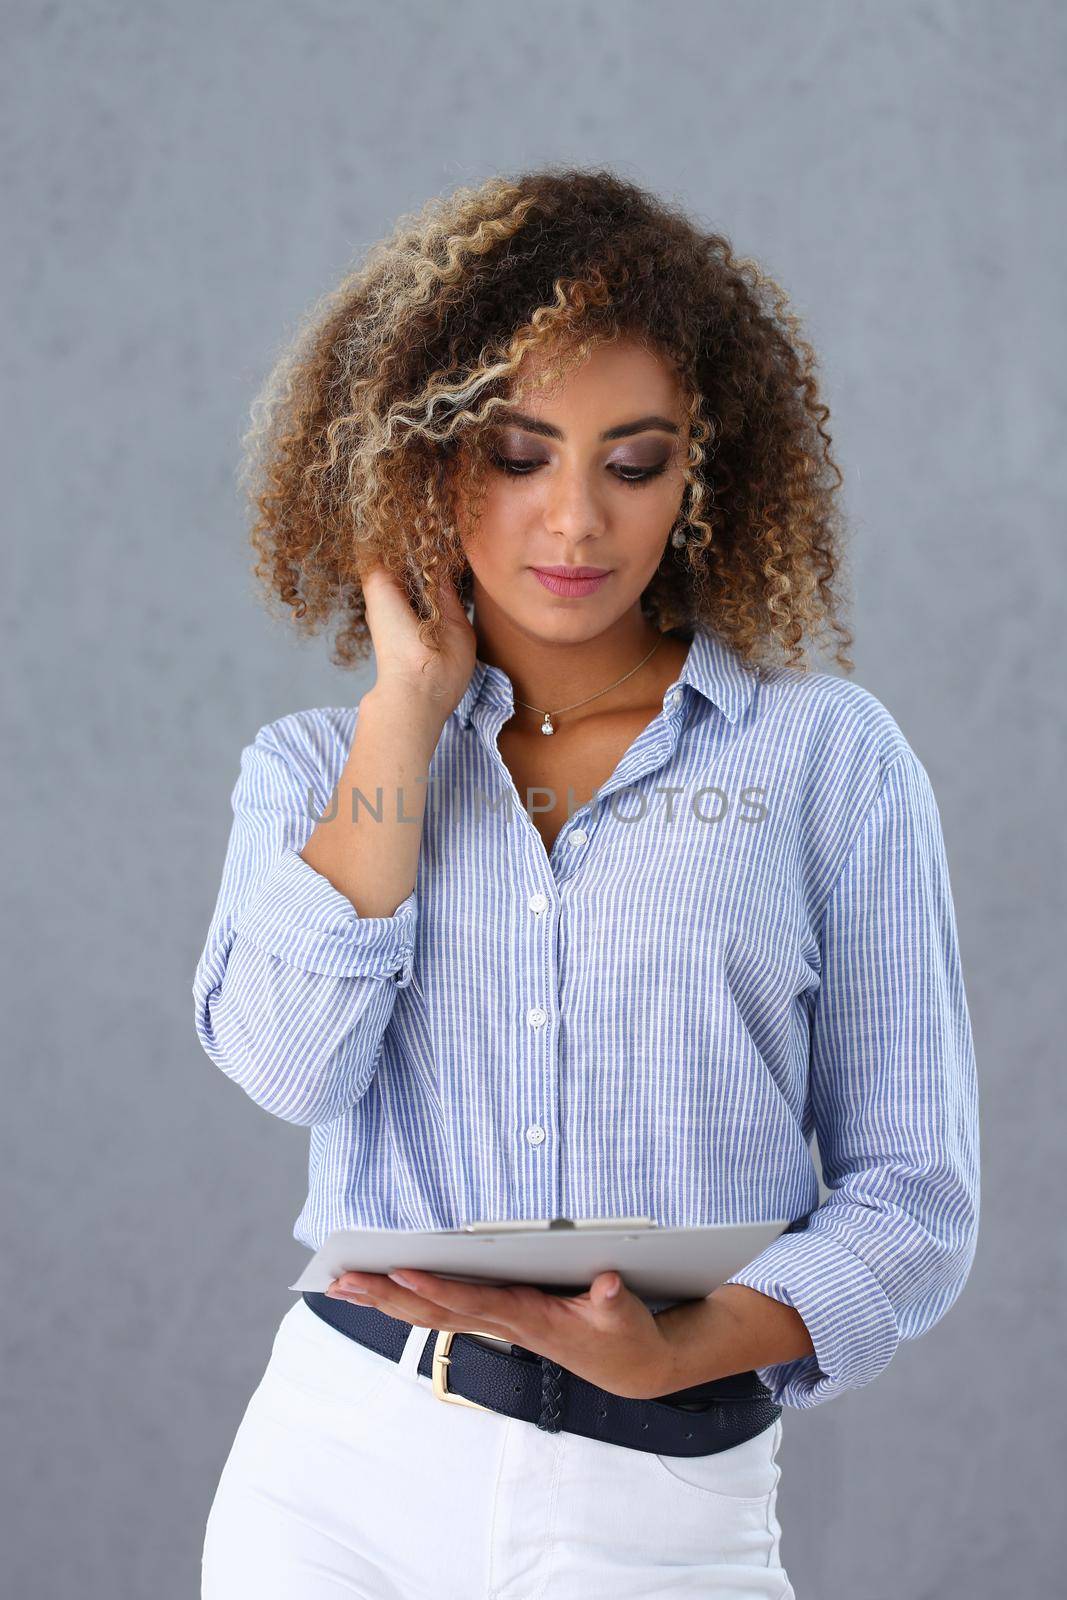 Beautiful black woman portrait. Holds a clipboard with financial statistics fashion style curly hair with white locks eye view of the camera